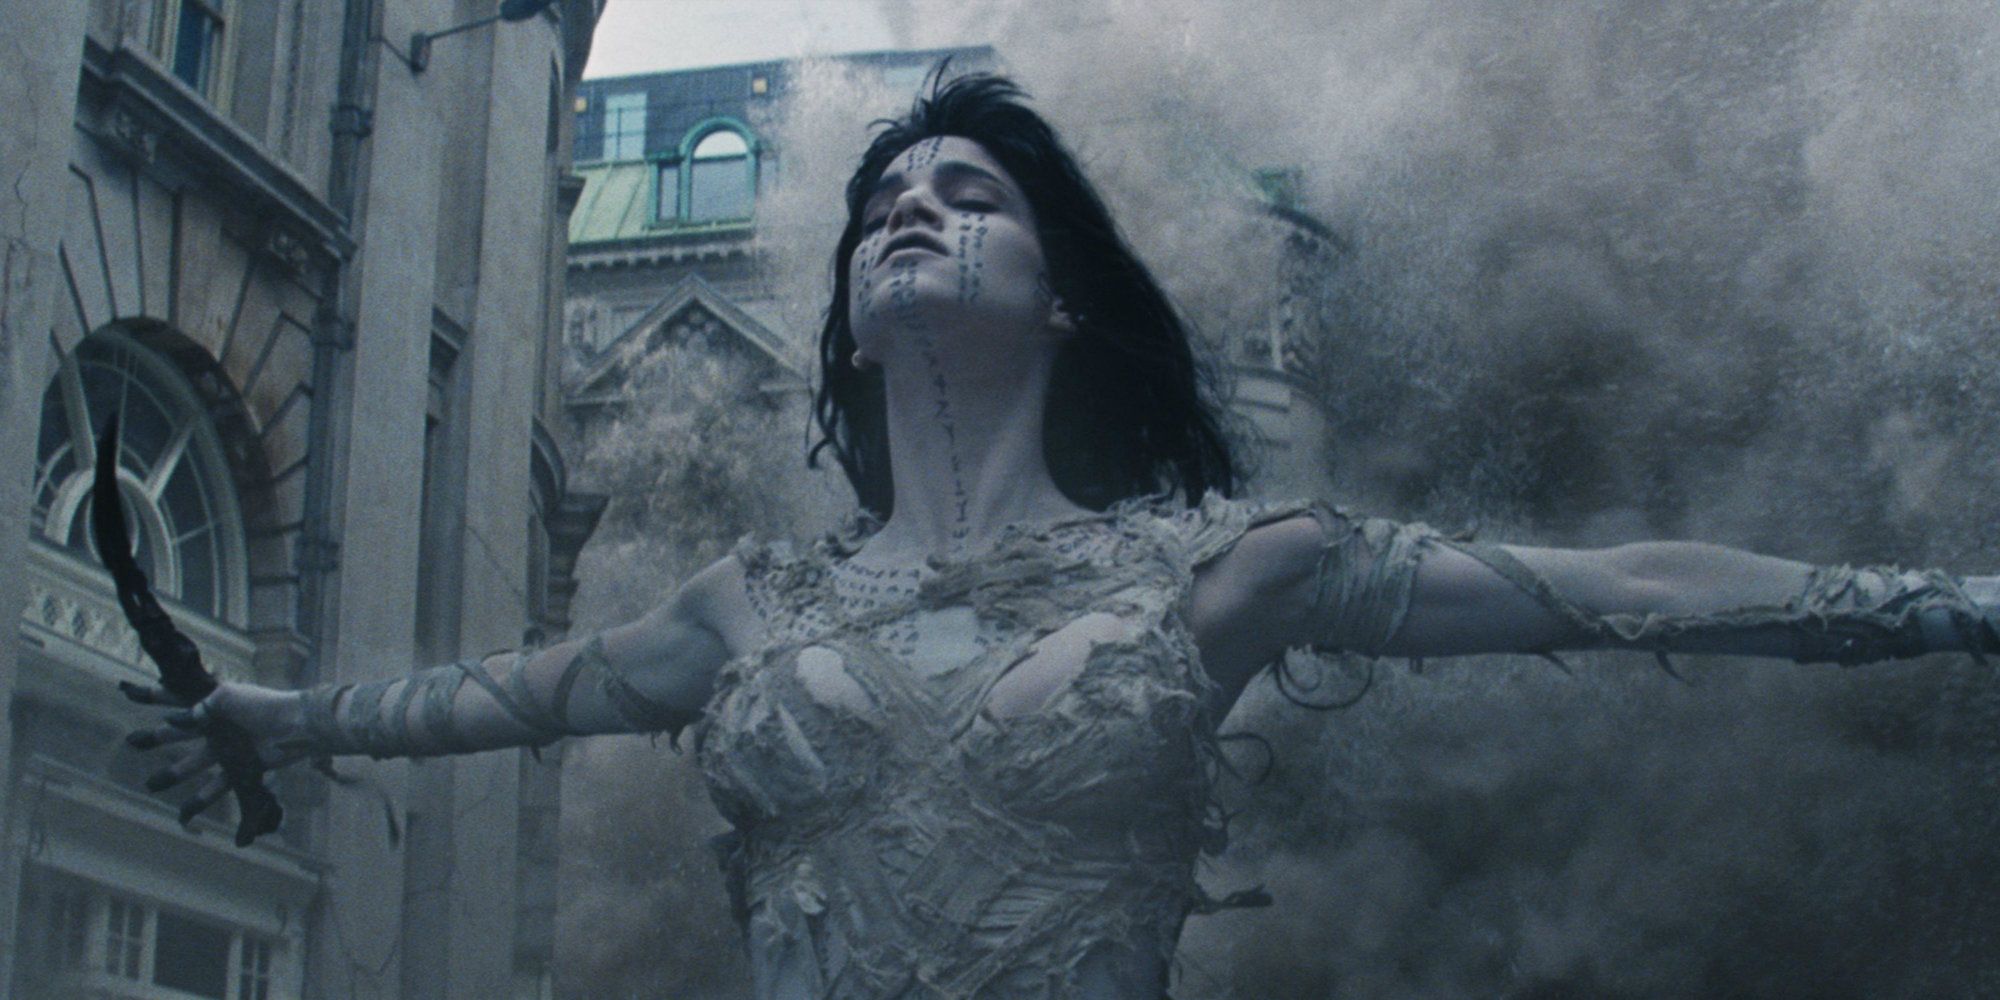 Princess Ahmanet’s 5 Stages of Transformation in The Mummy